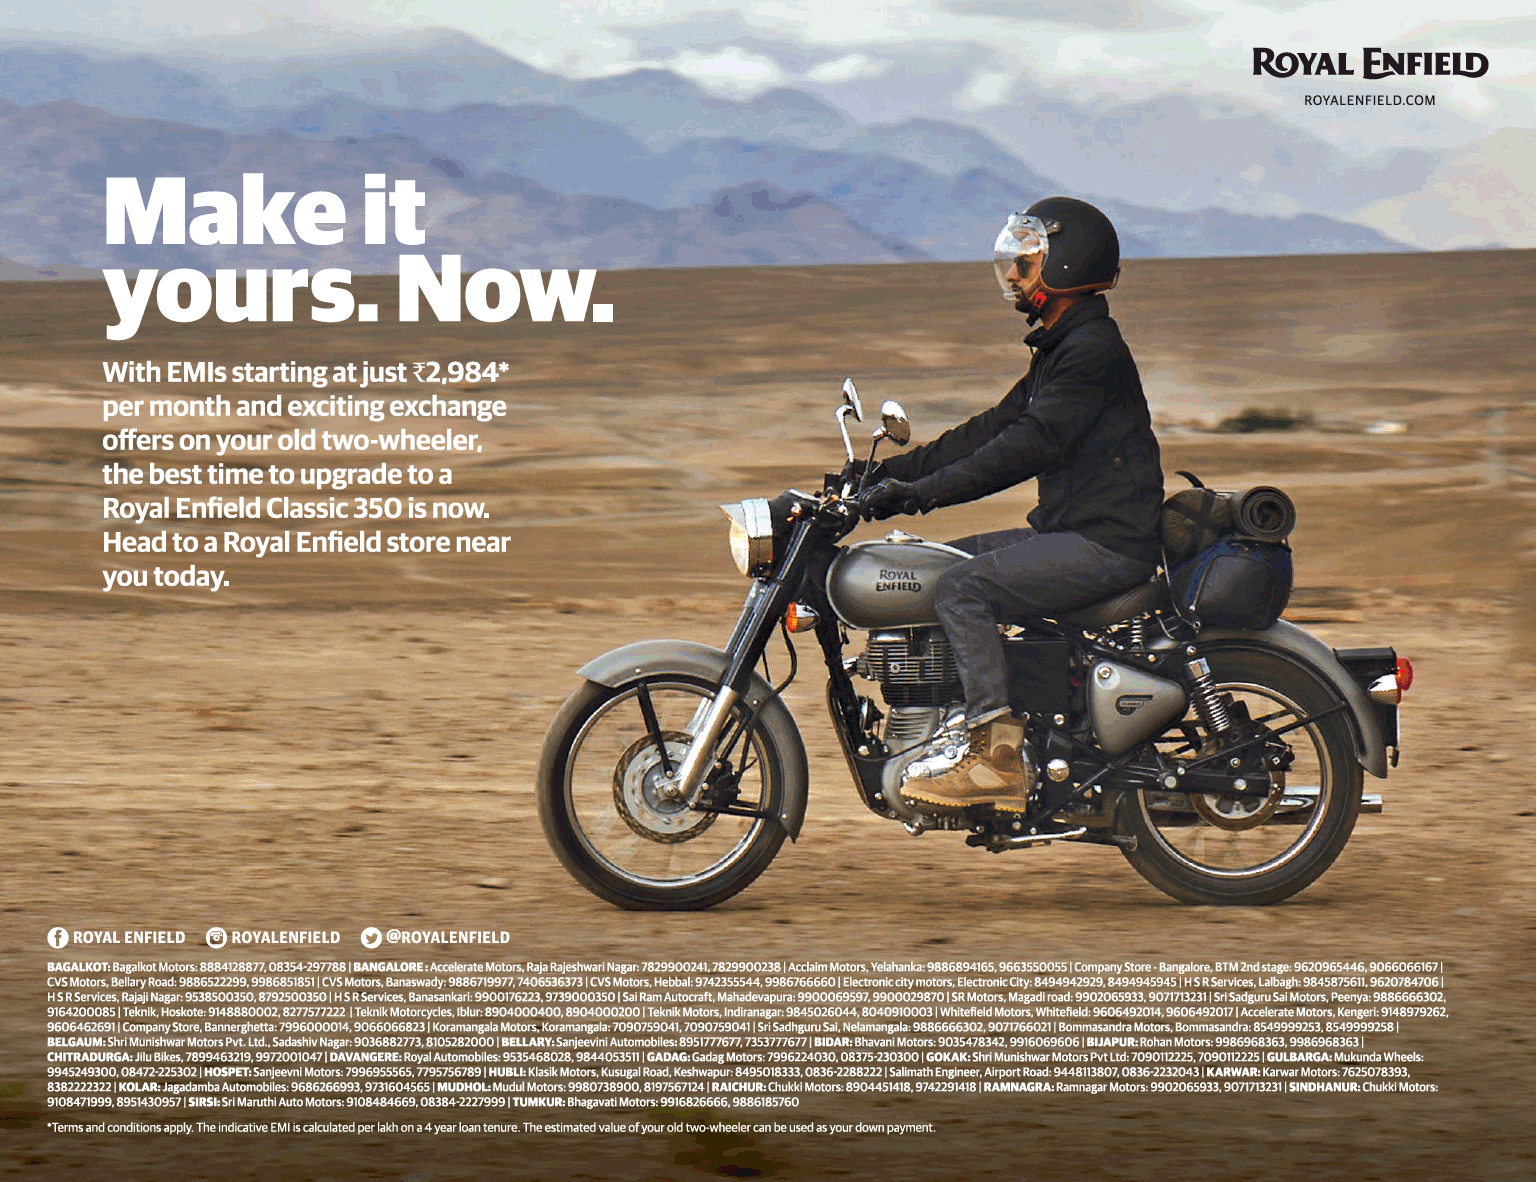 Royal Enfield Bikes Make It Yours Now Ad - Advert Gallery